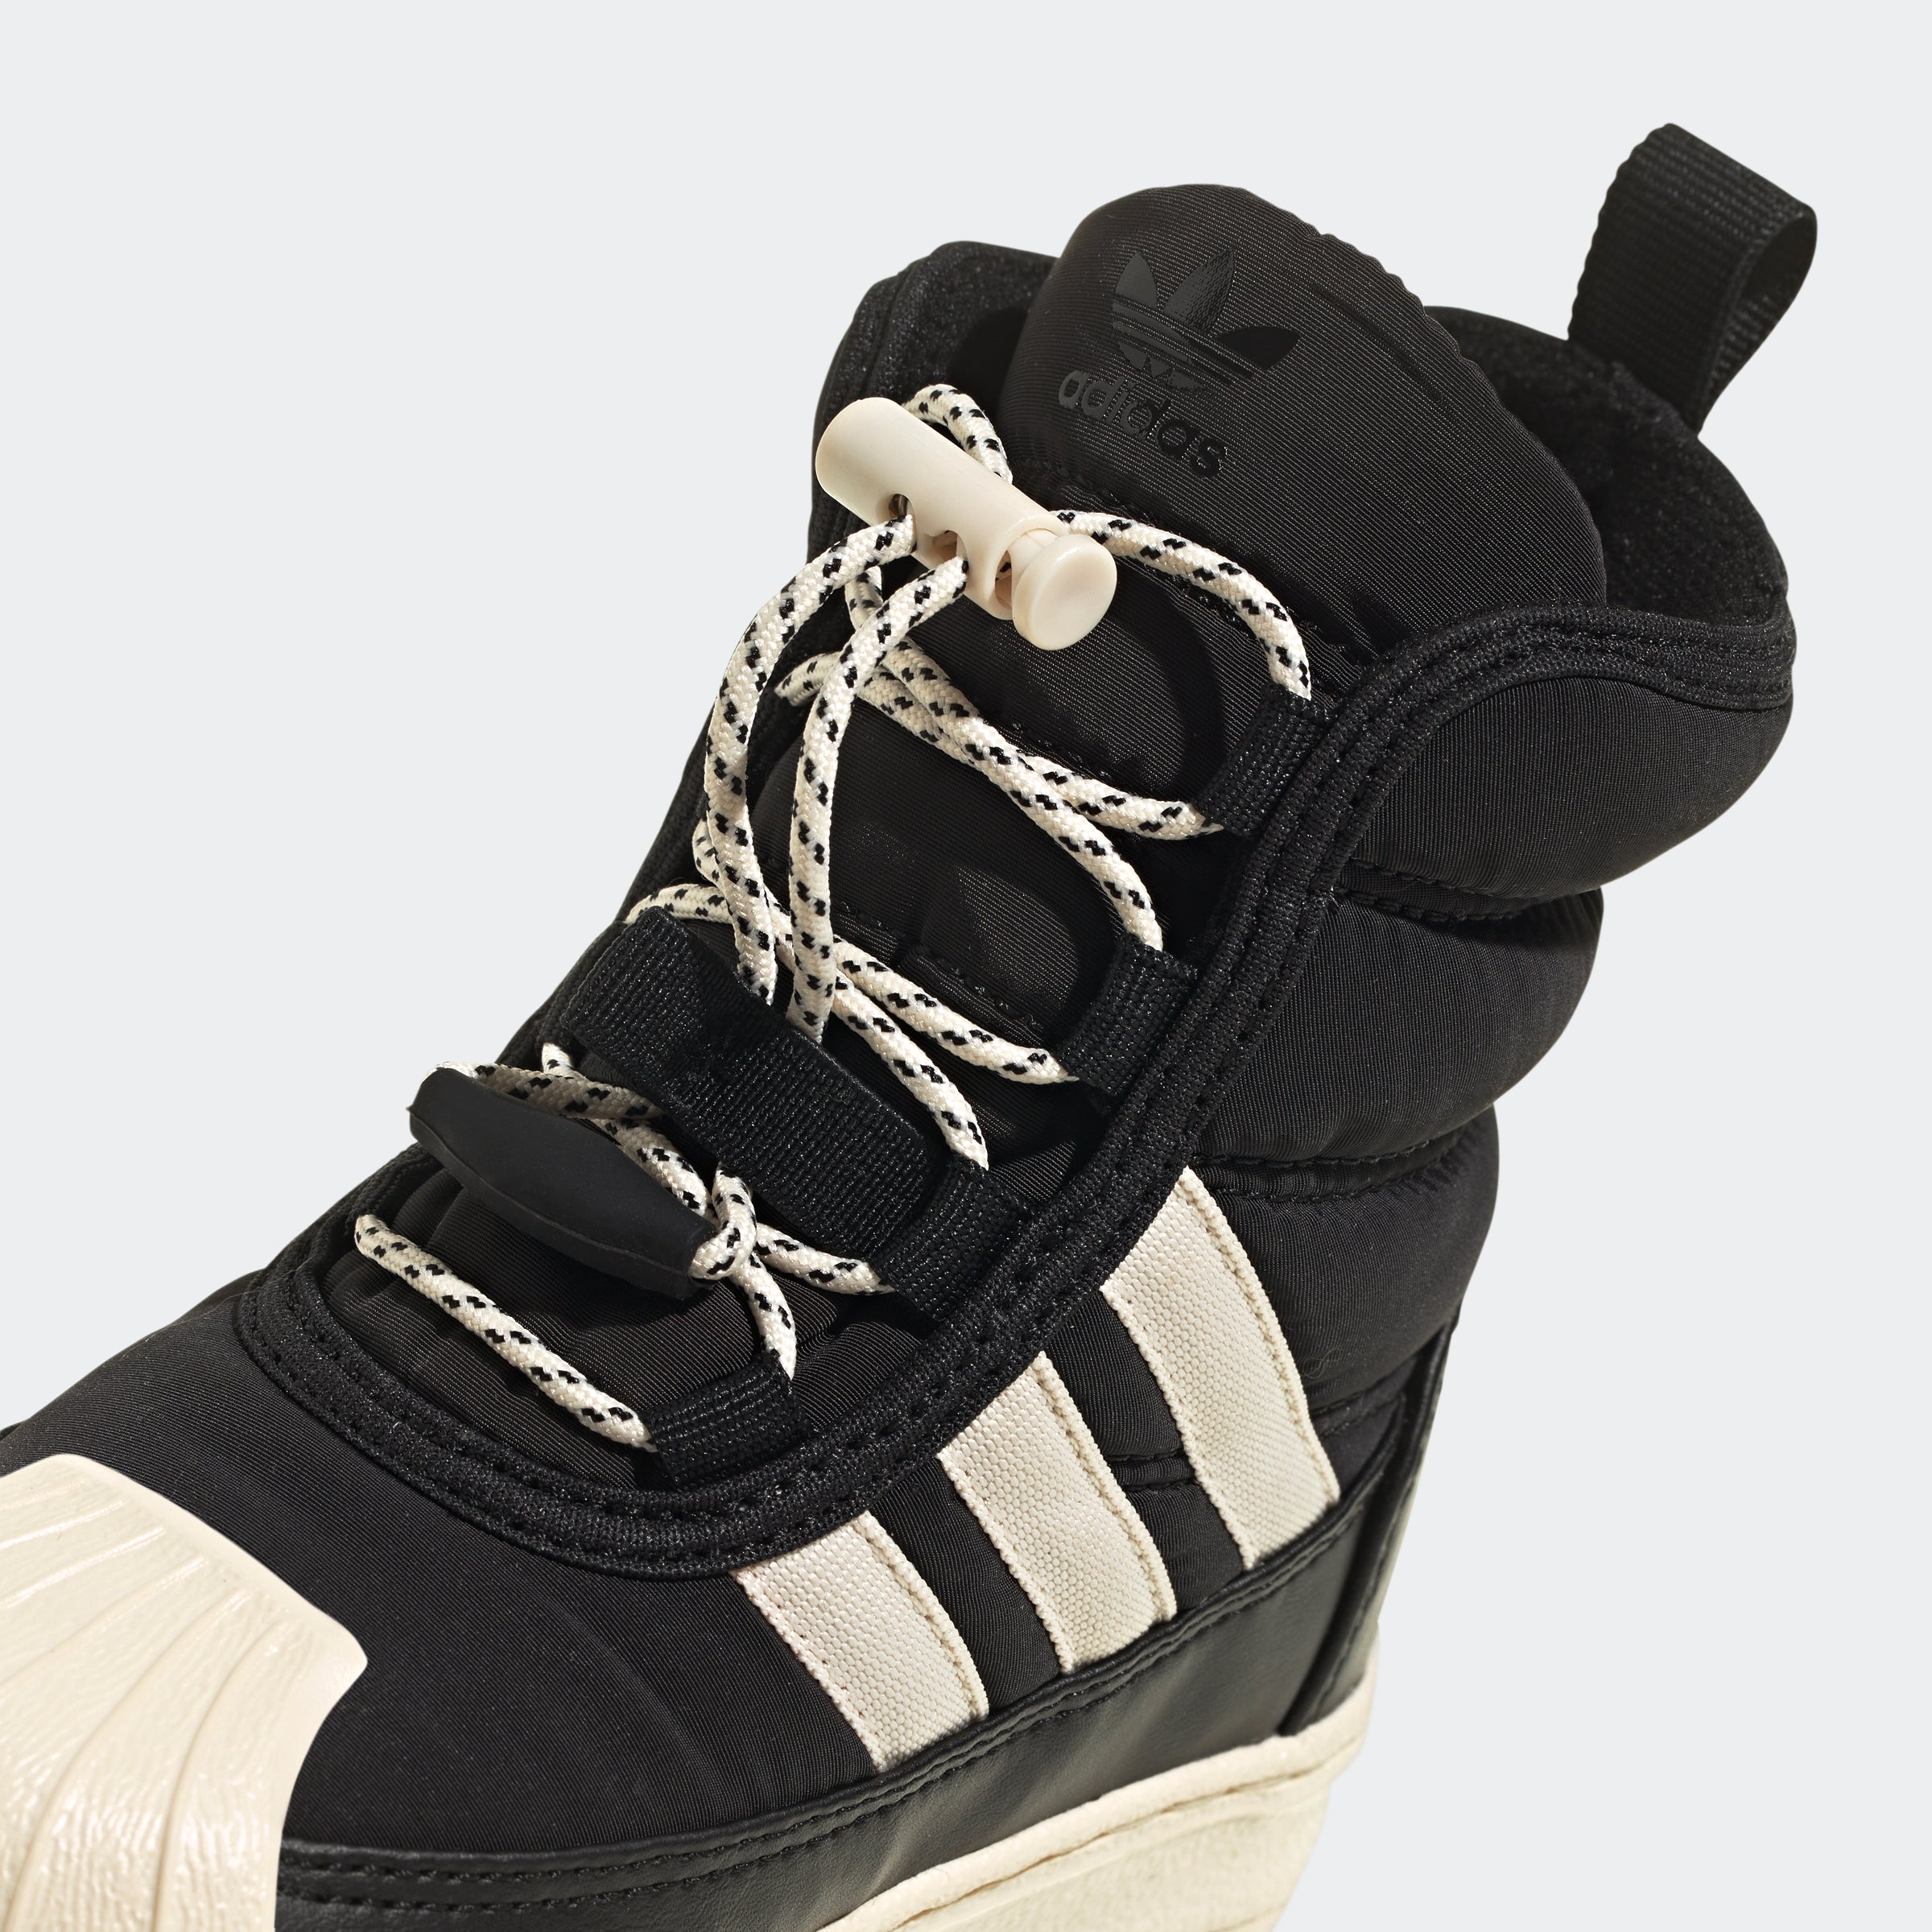 Toddlers adidas Superstar 360 2.0 Boots Black | Chicago City Sports